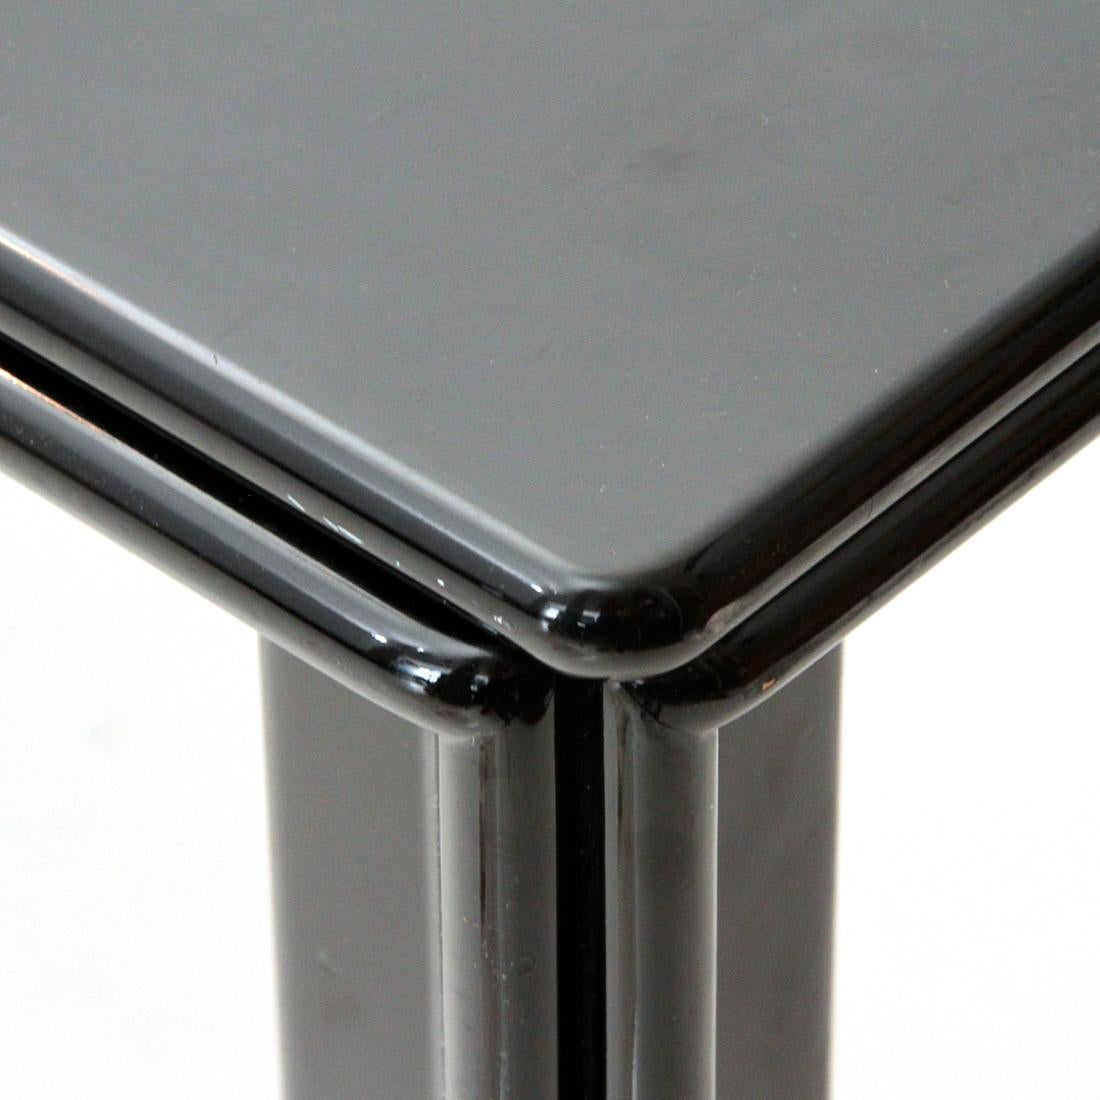 Late 20th Century Mou Lacquered Black Table by Tobia Scarpa for Molteni, 1970s